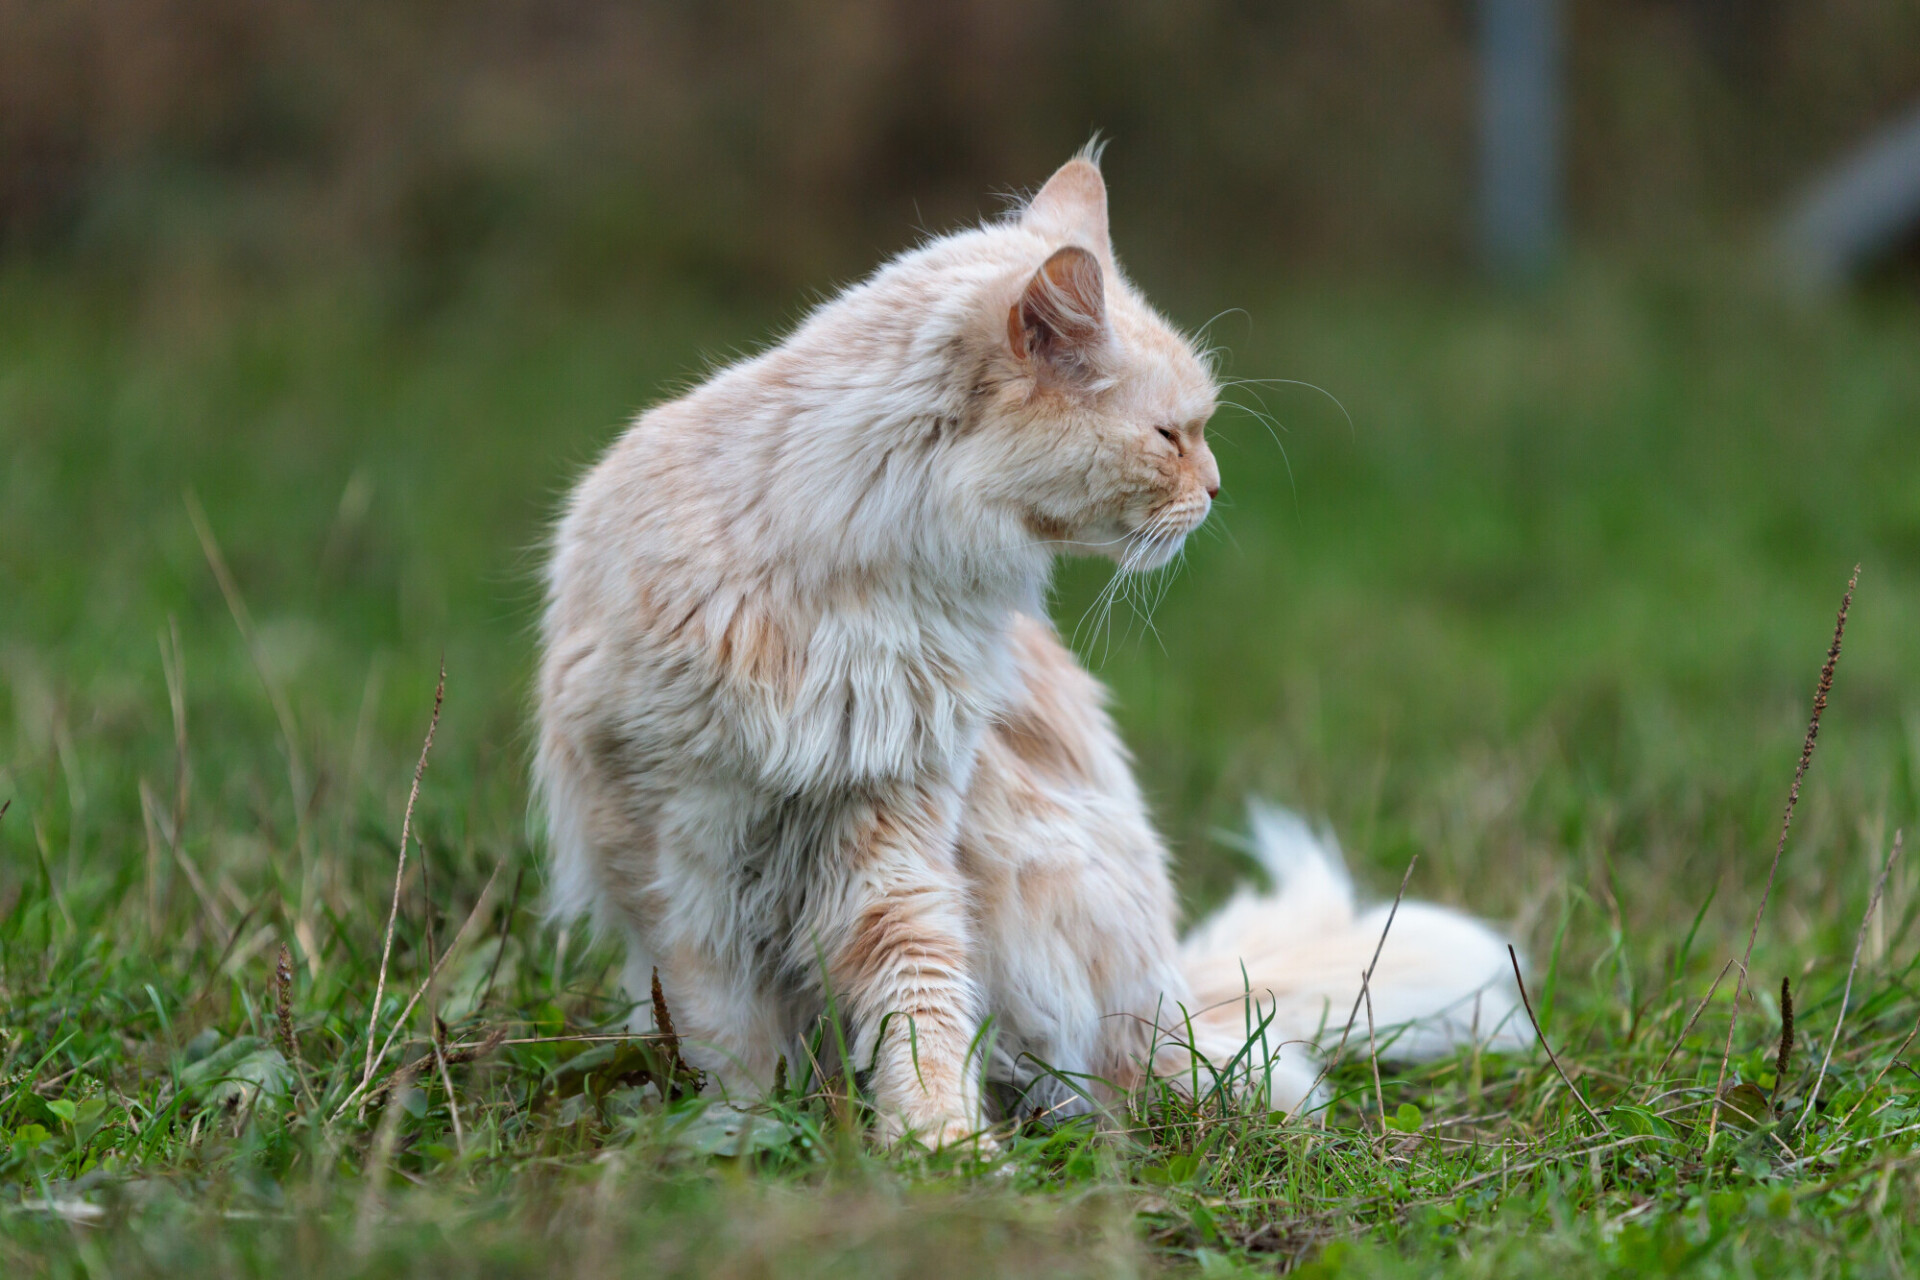 Cream-coloured Maincoon cat sitting on a green meadow